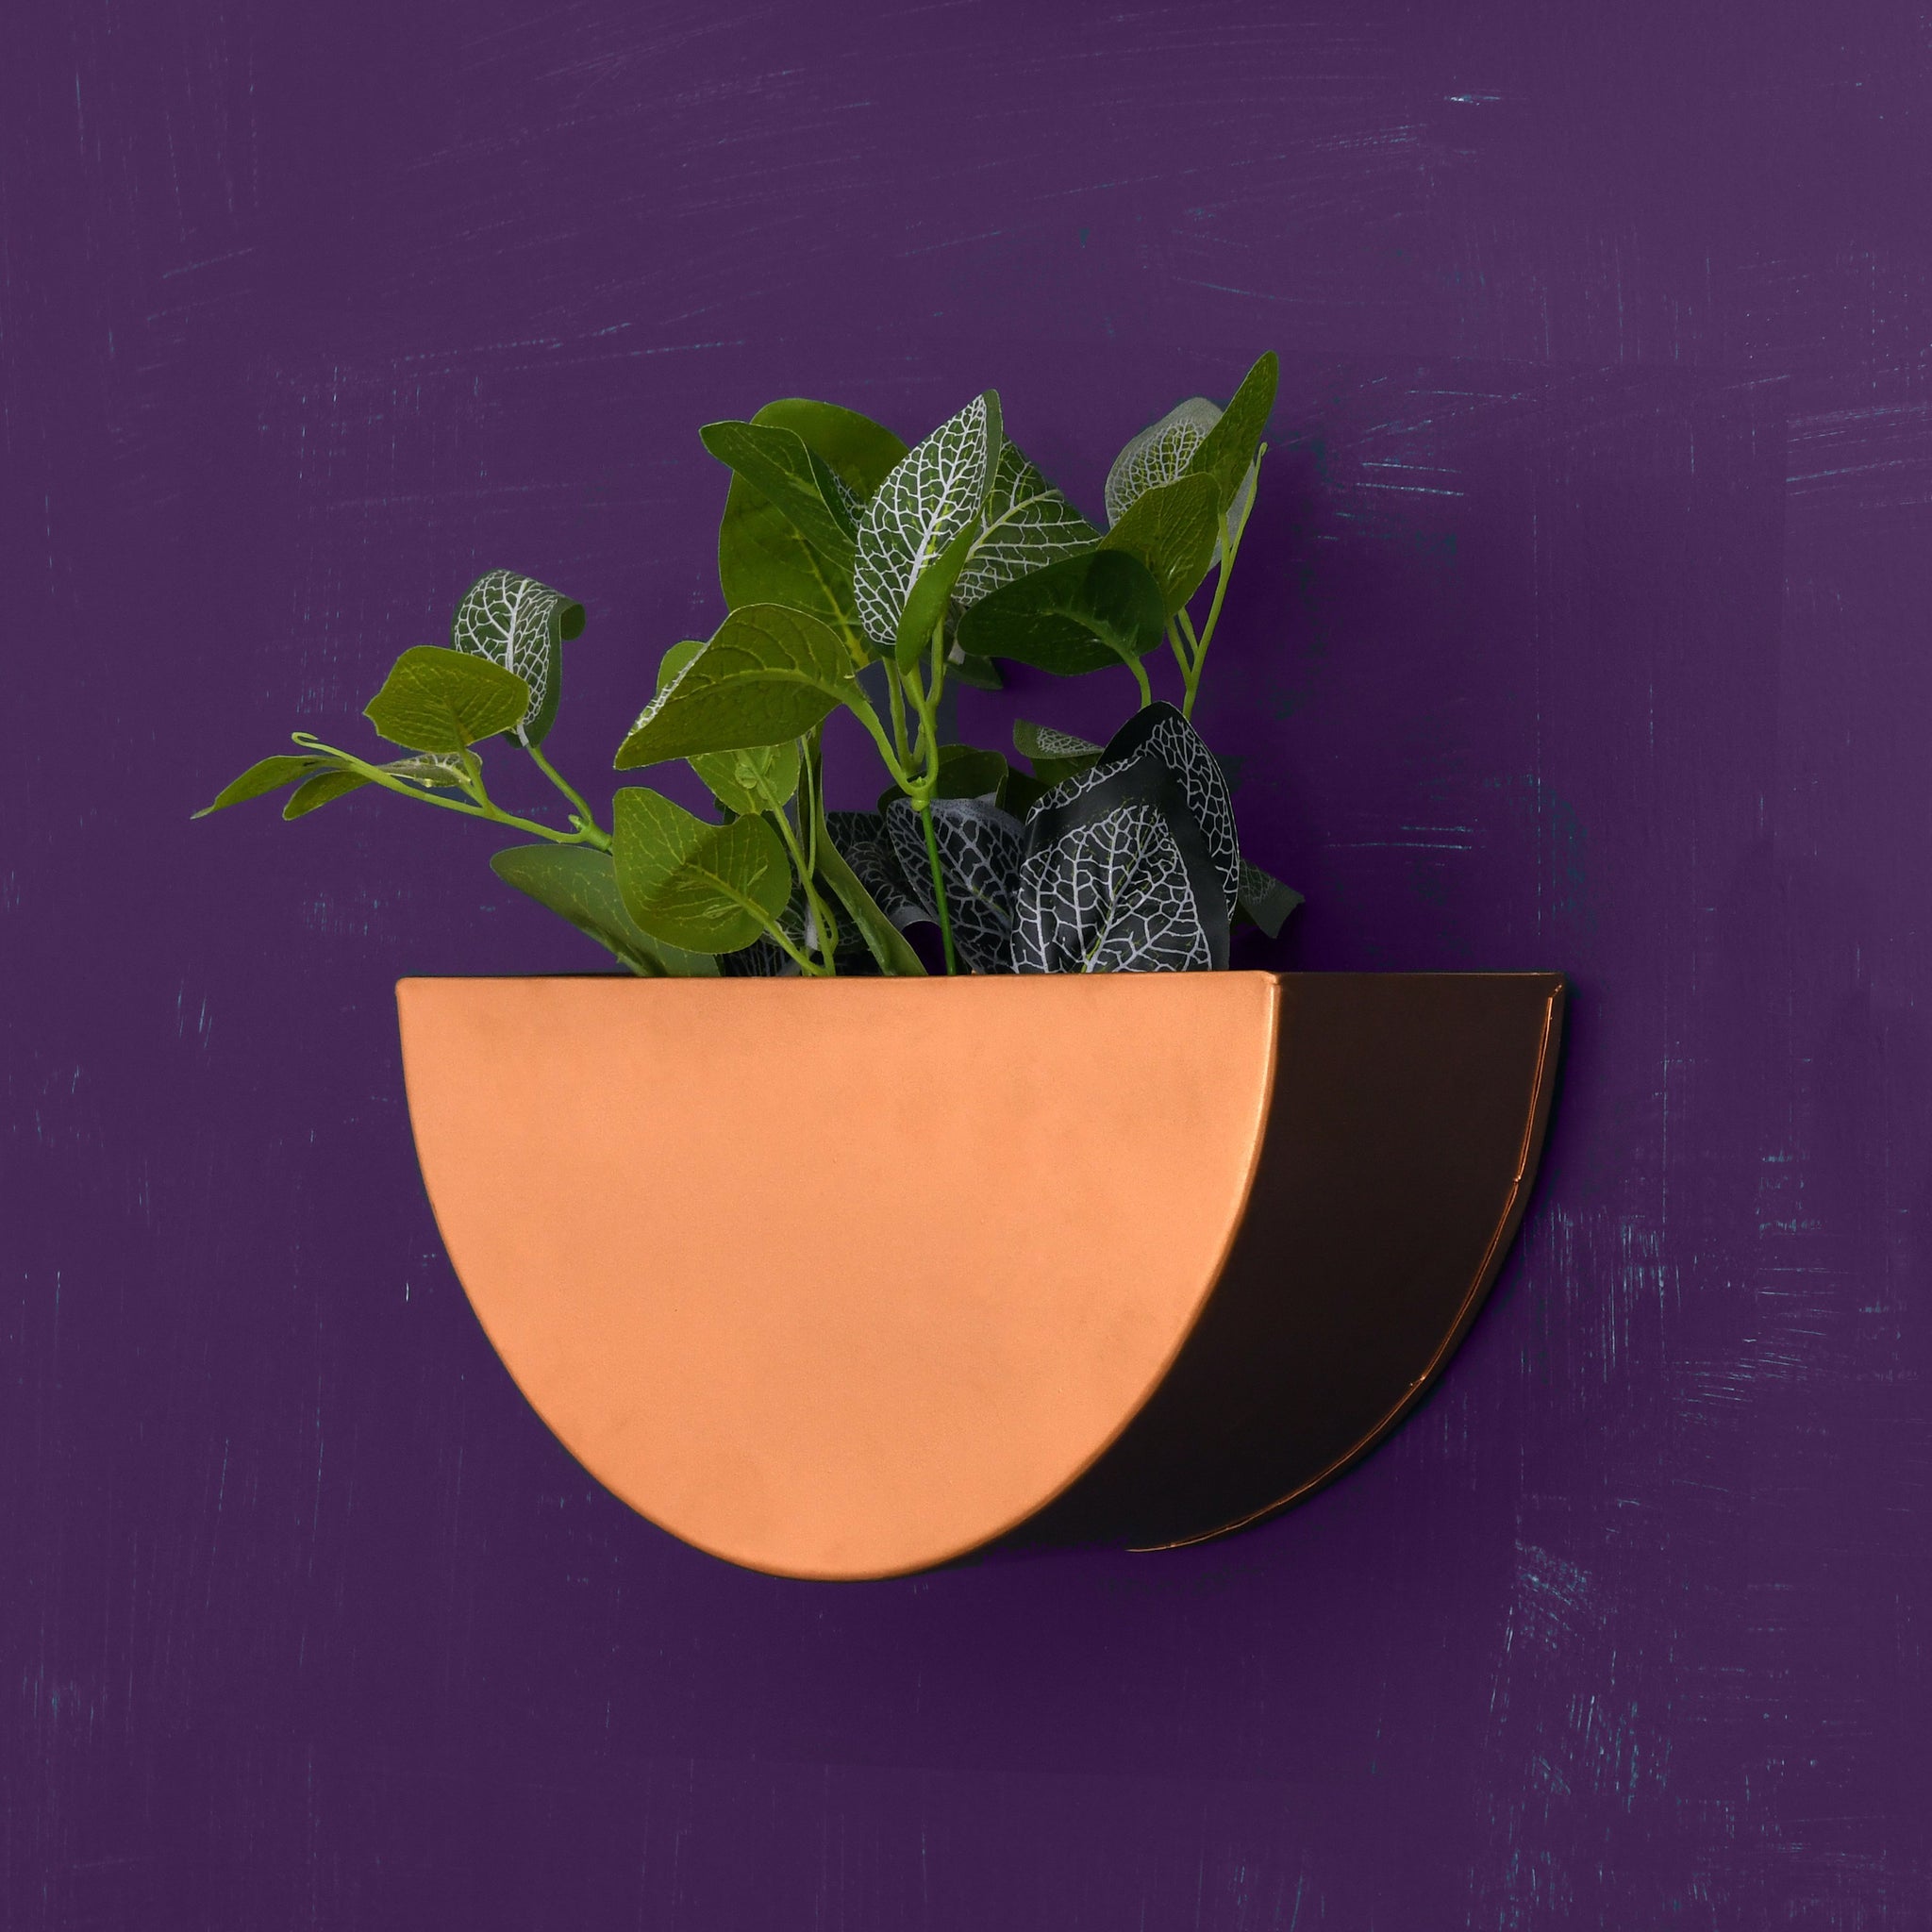 Crescent Metal Mounted Wall Planter in Rose Gold 1 BHK Interiors